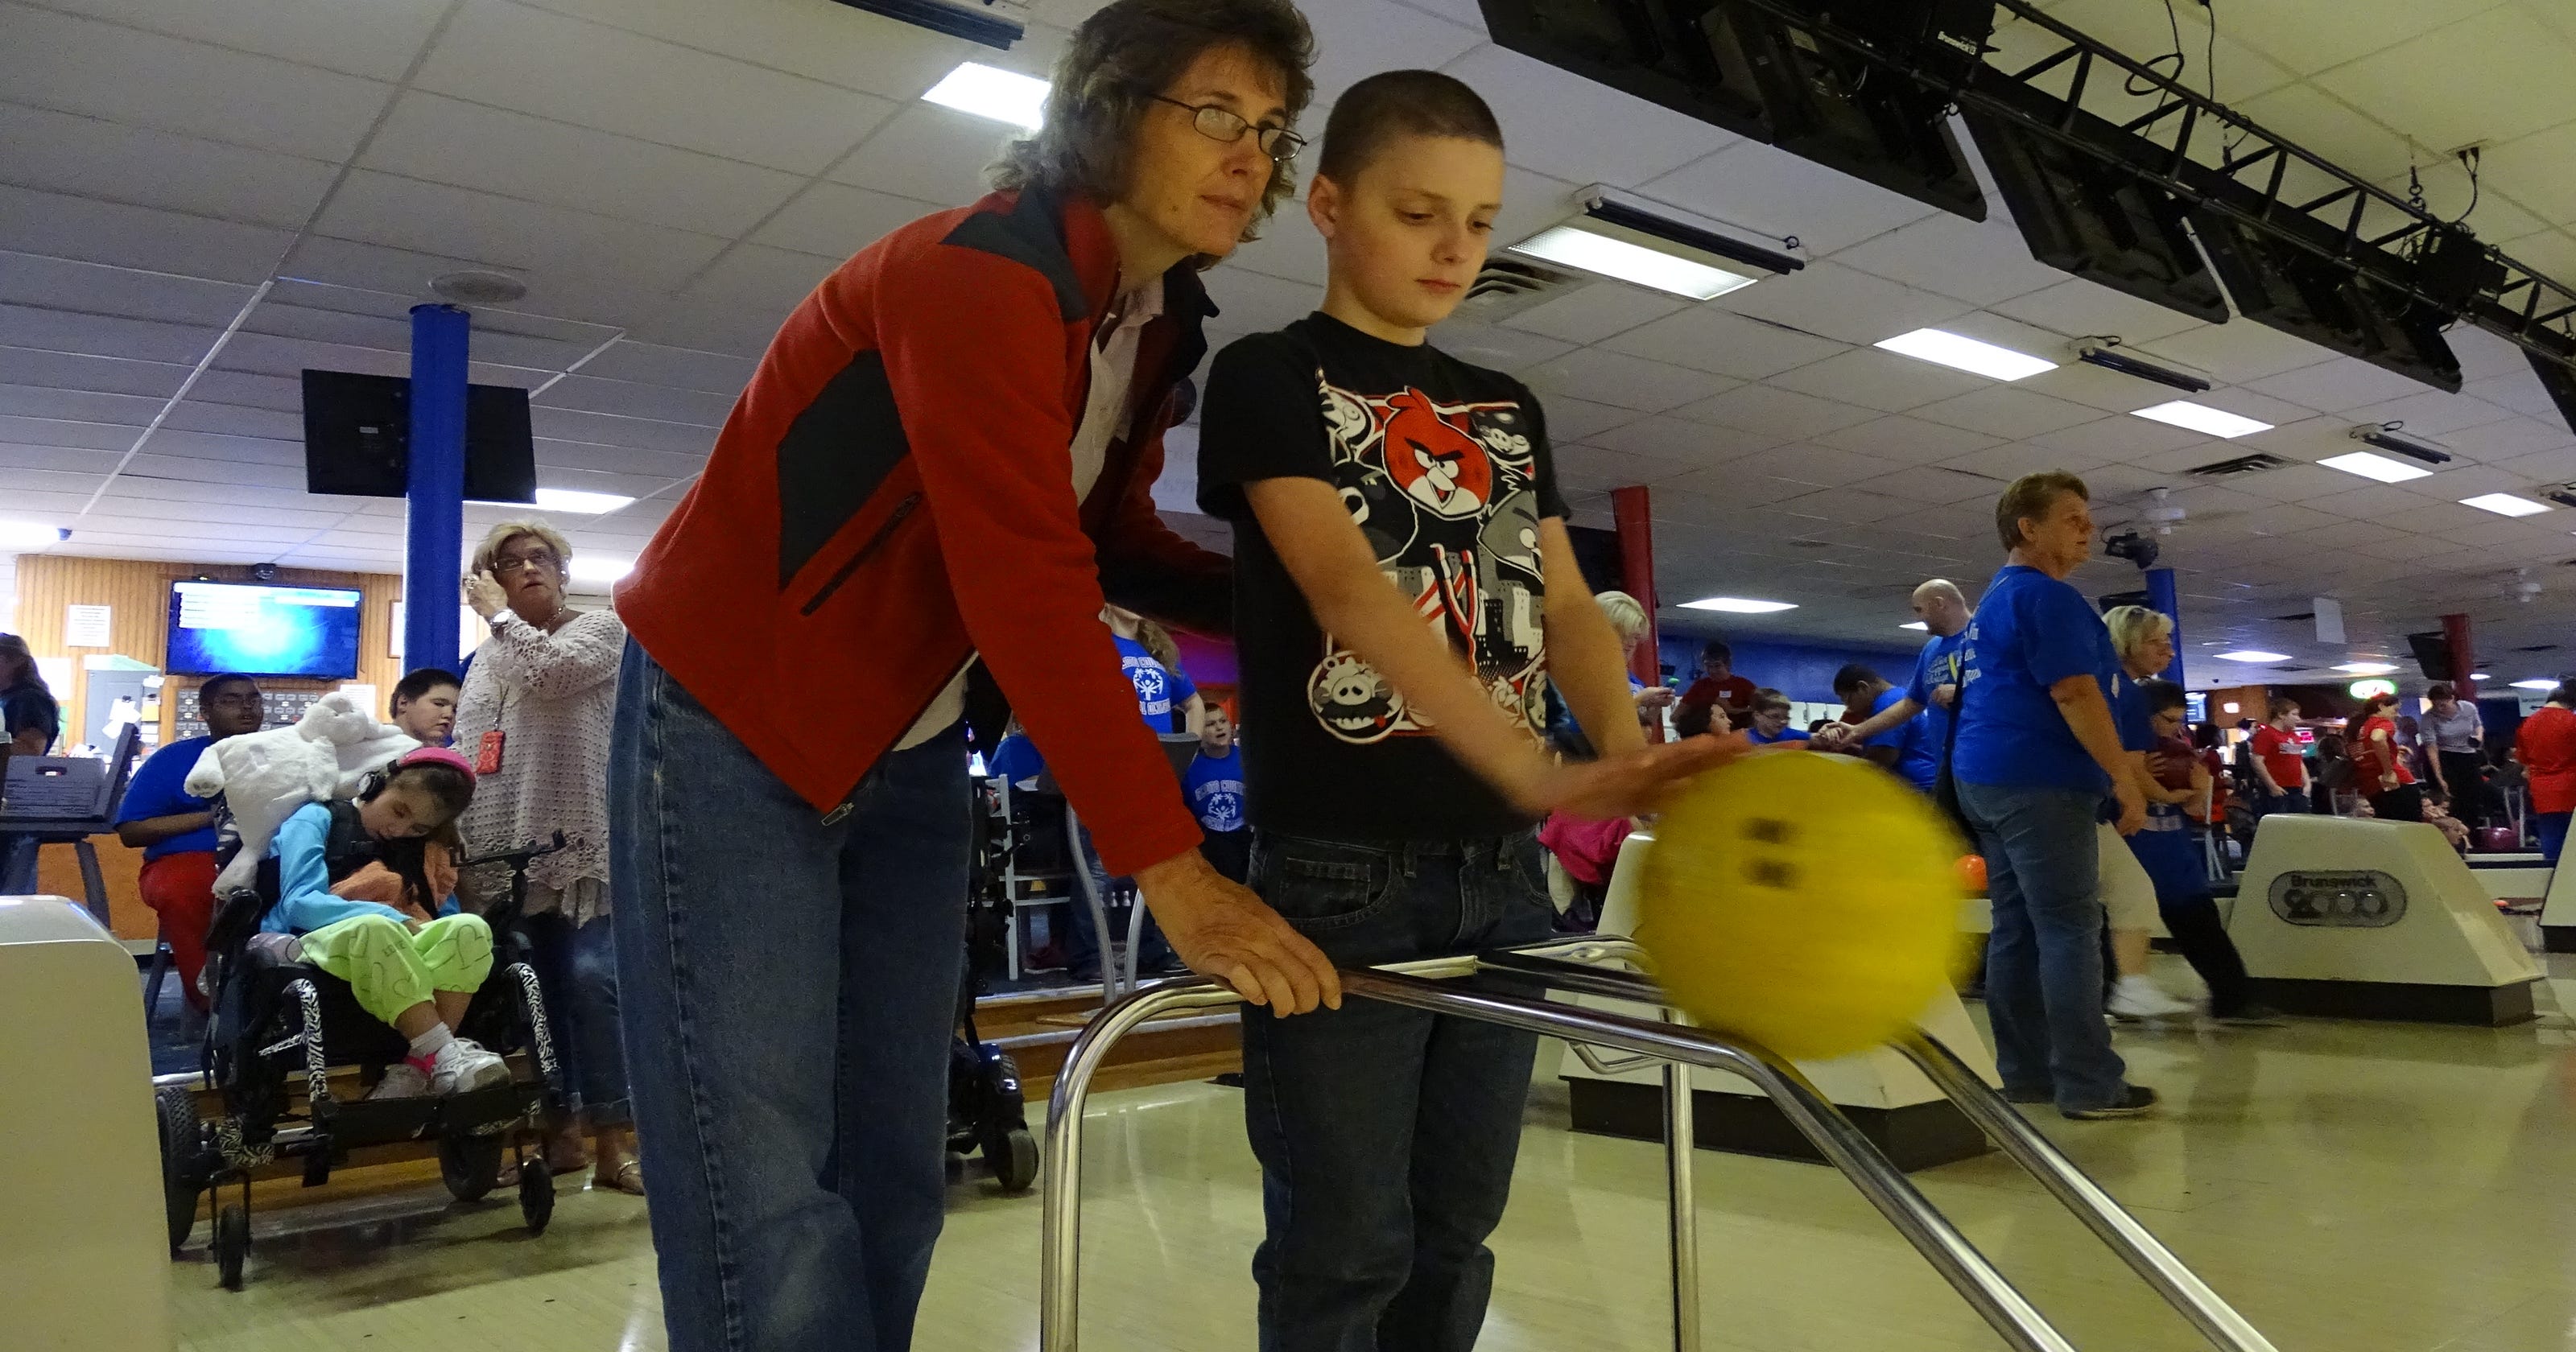 Special Olympics Bowling Brings Smiles